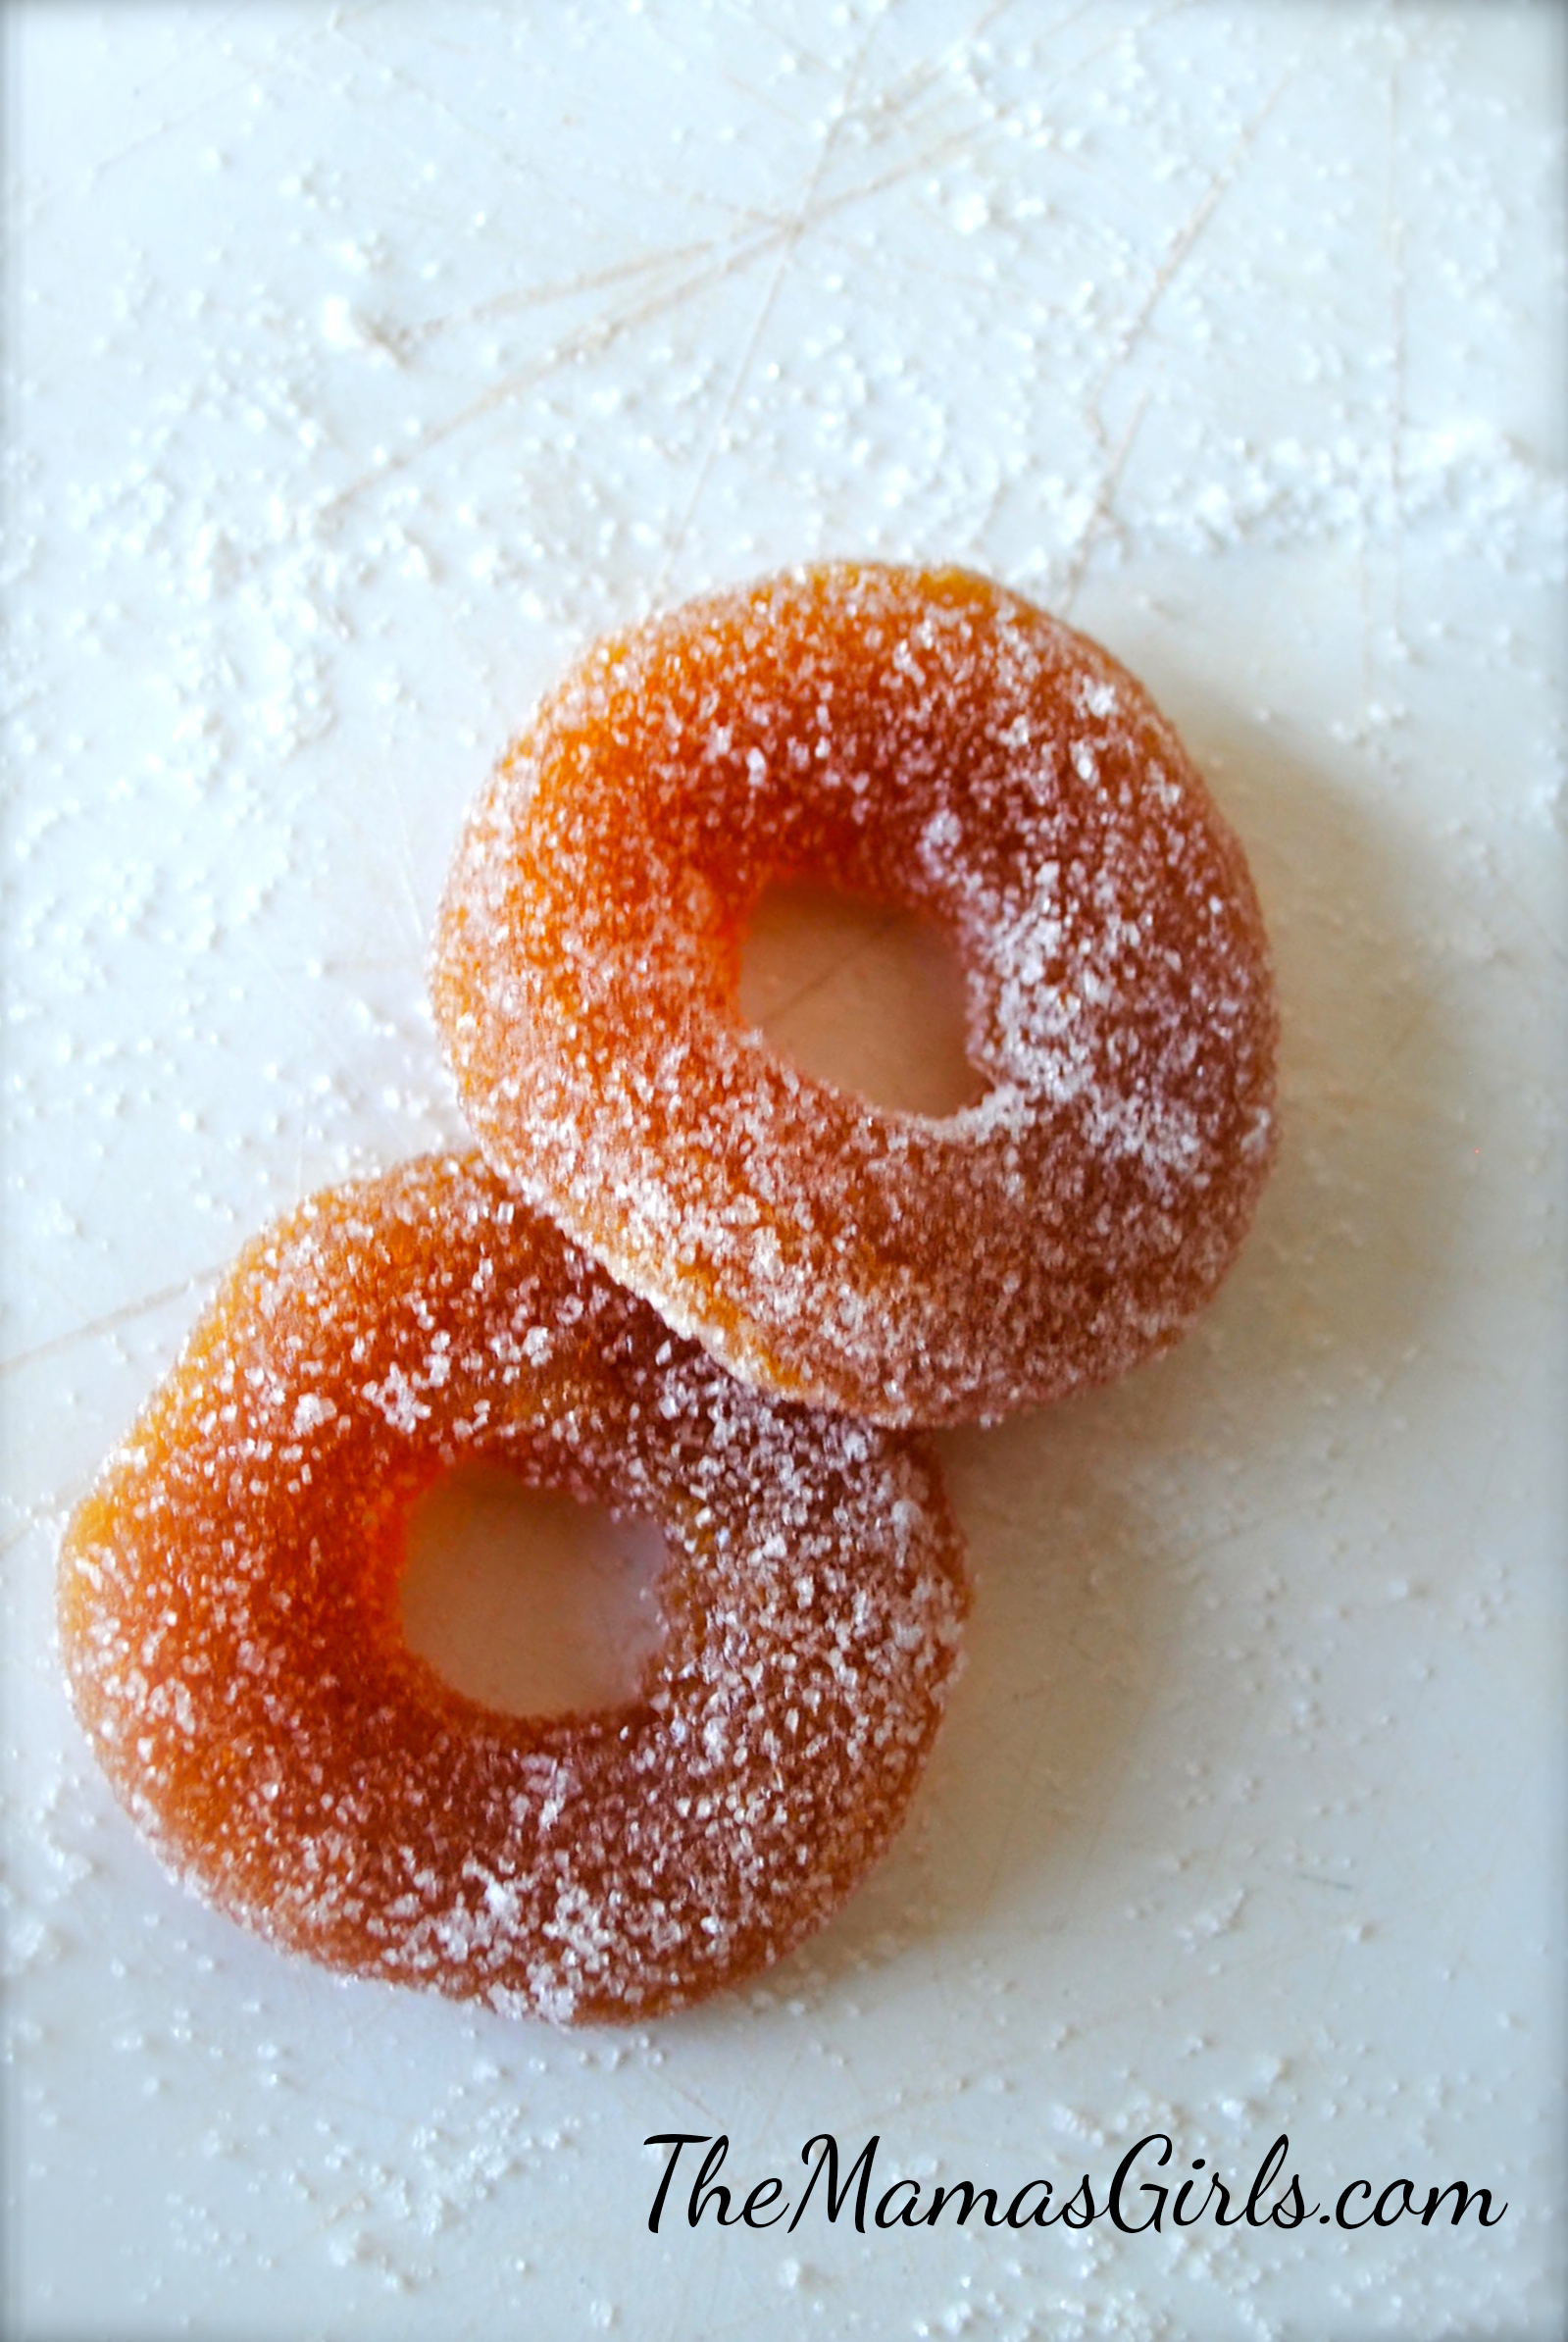 Homemade Peach Rings with real fruit